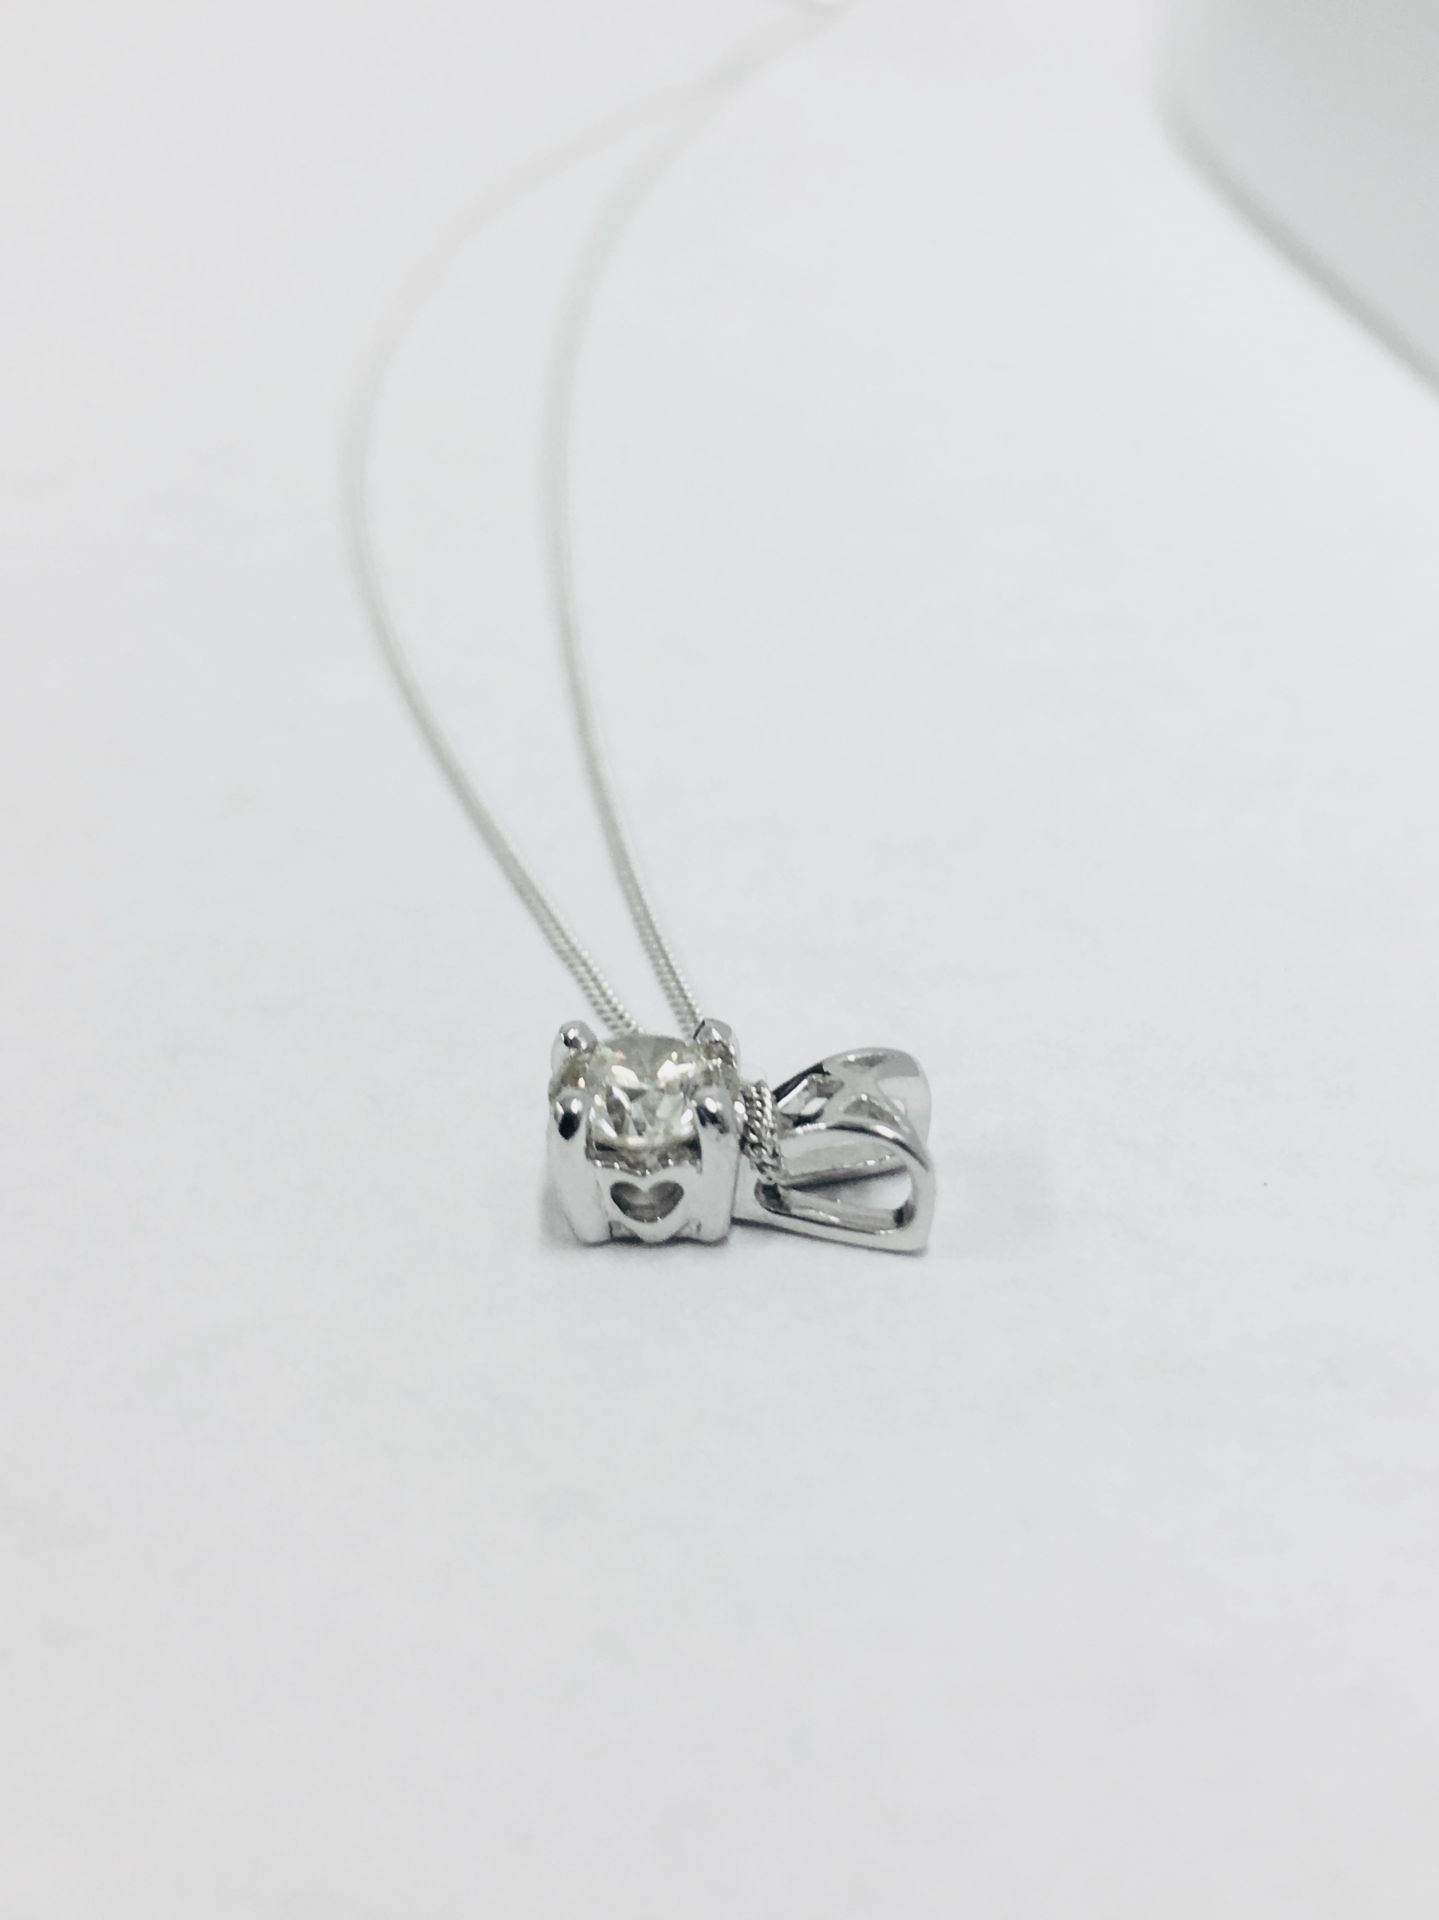 1.00ct diamond pendant set in platinum. H colour and I1 clarity. 4 claw setting with open bale and - Image 2 of 2